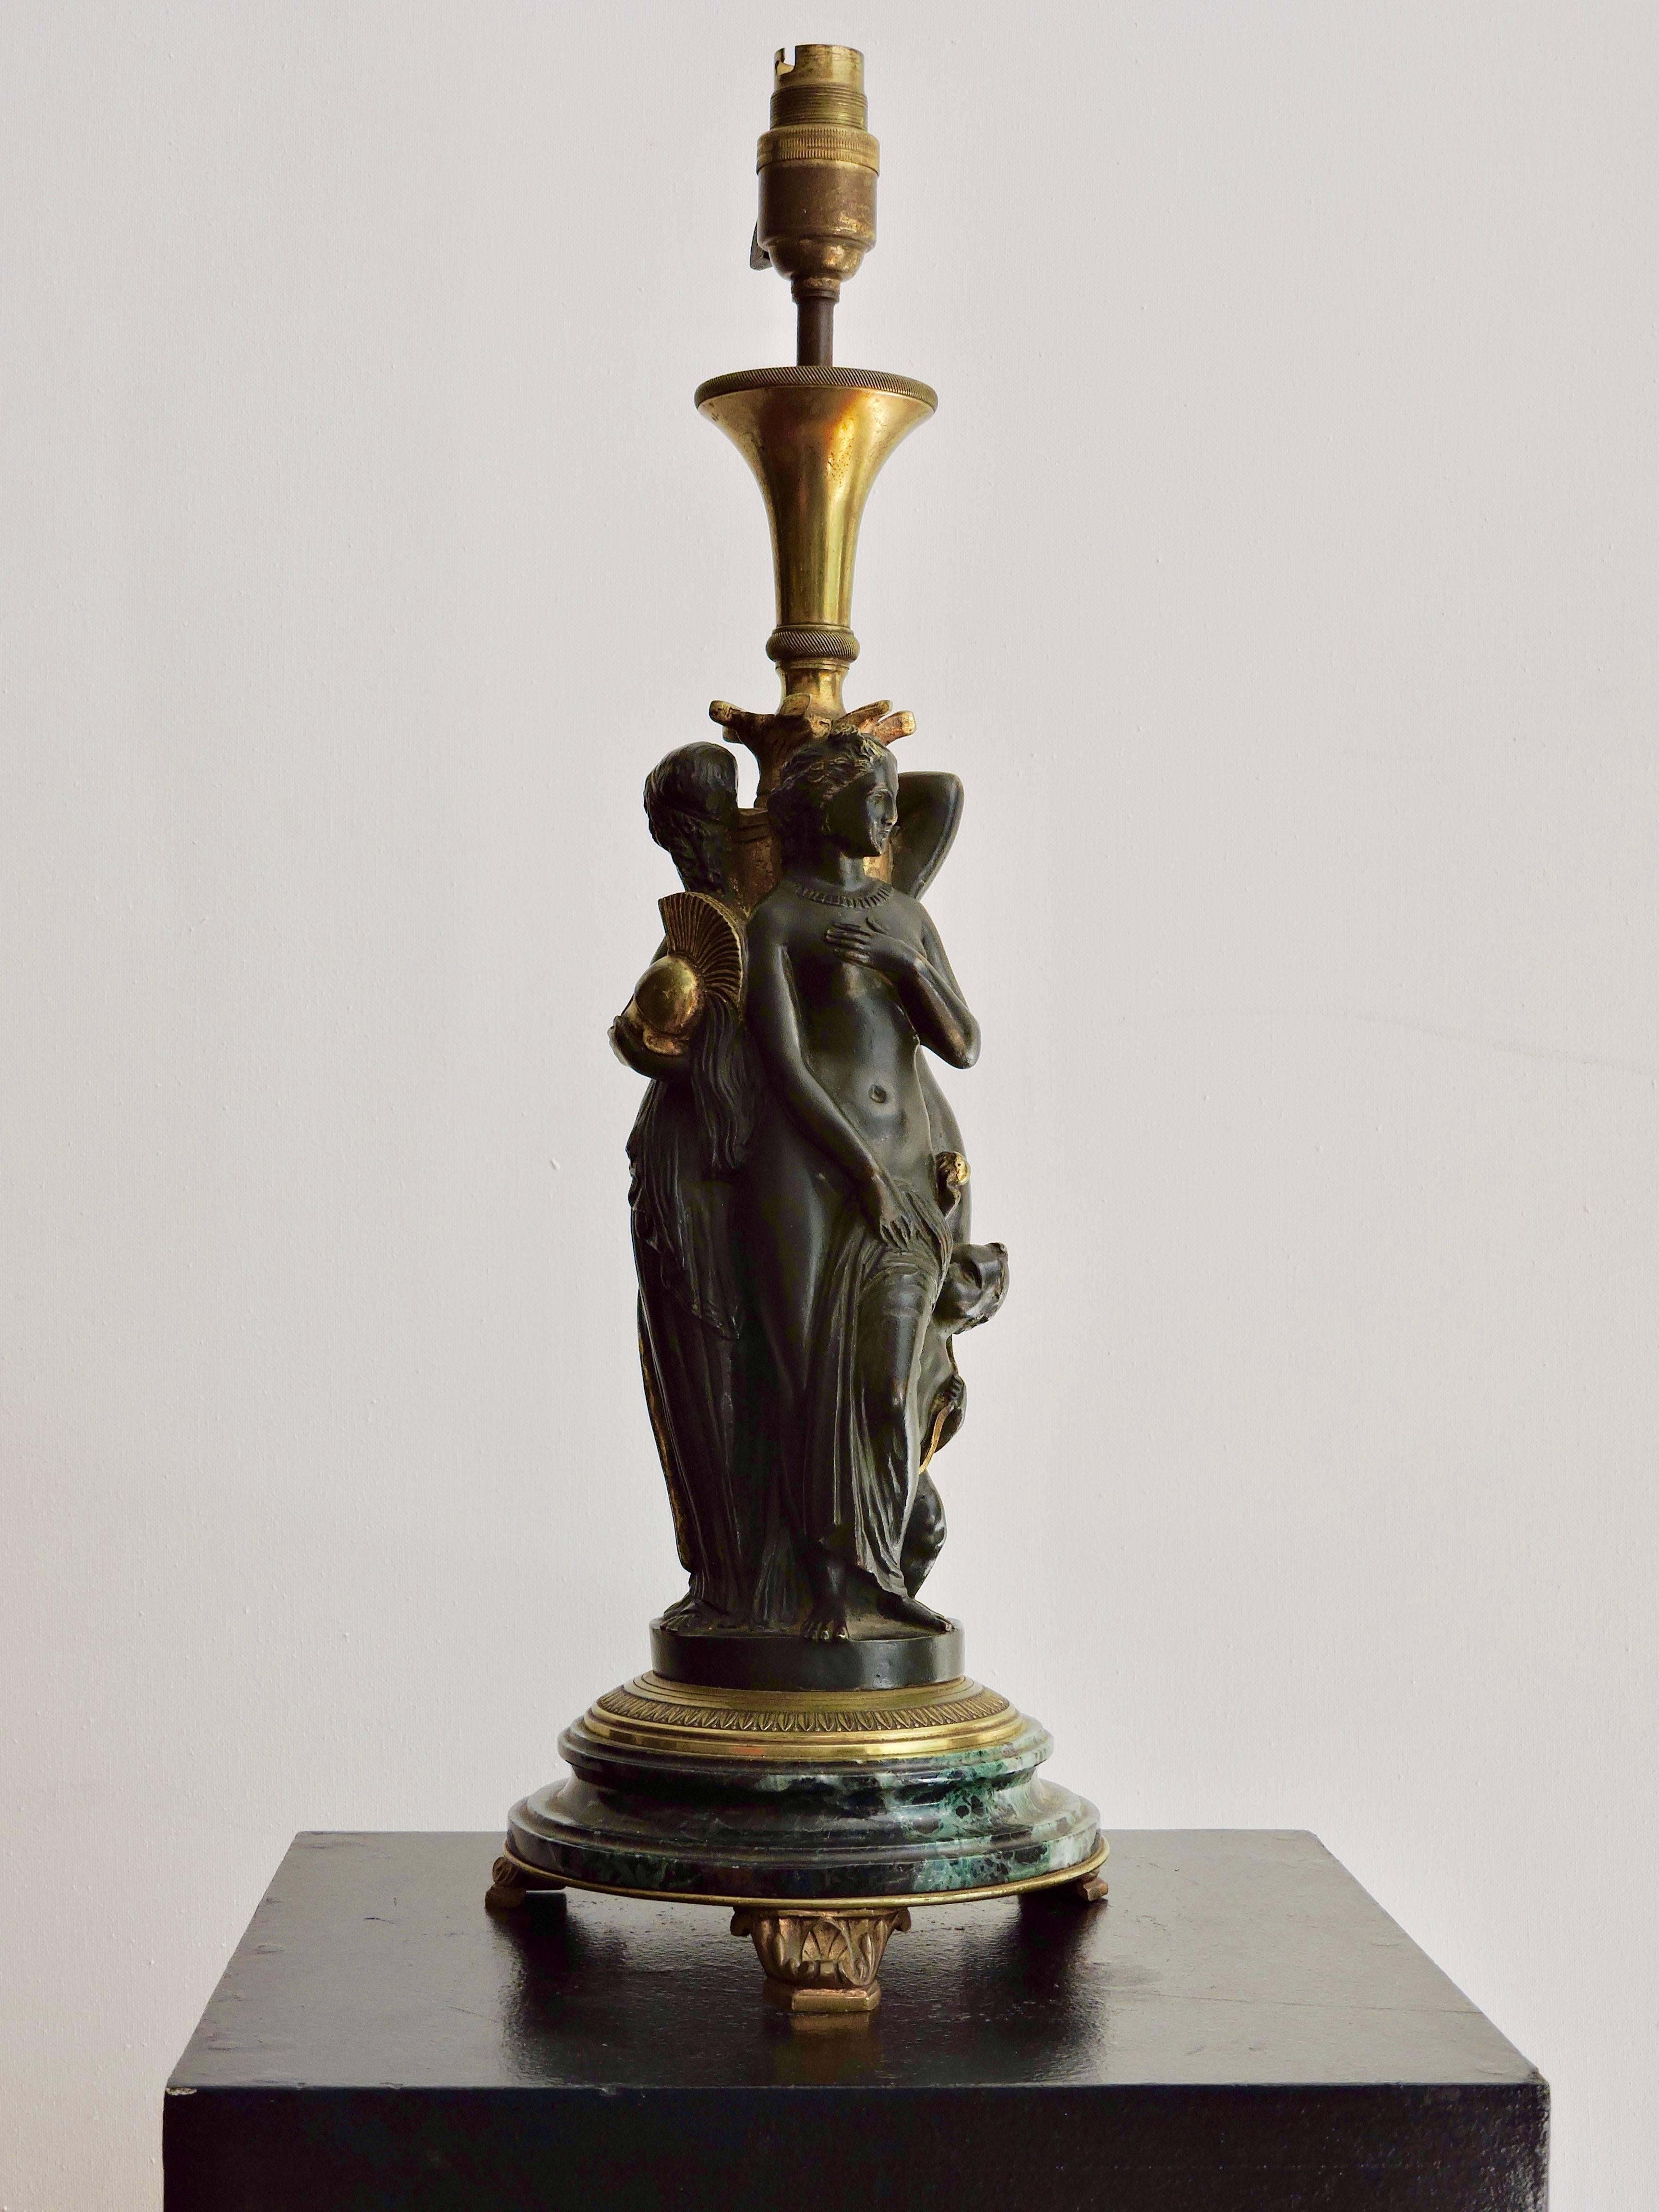 A Napoléon III patinated bronze and ormolu lamp three graces designed on a green marble base, signed A.Marrionet Bronzes Paris under the base
Total height with light fitting 49 cm.